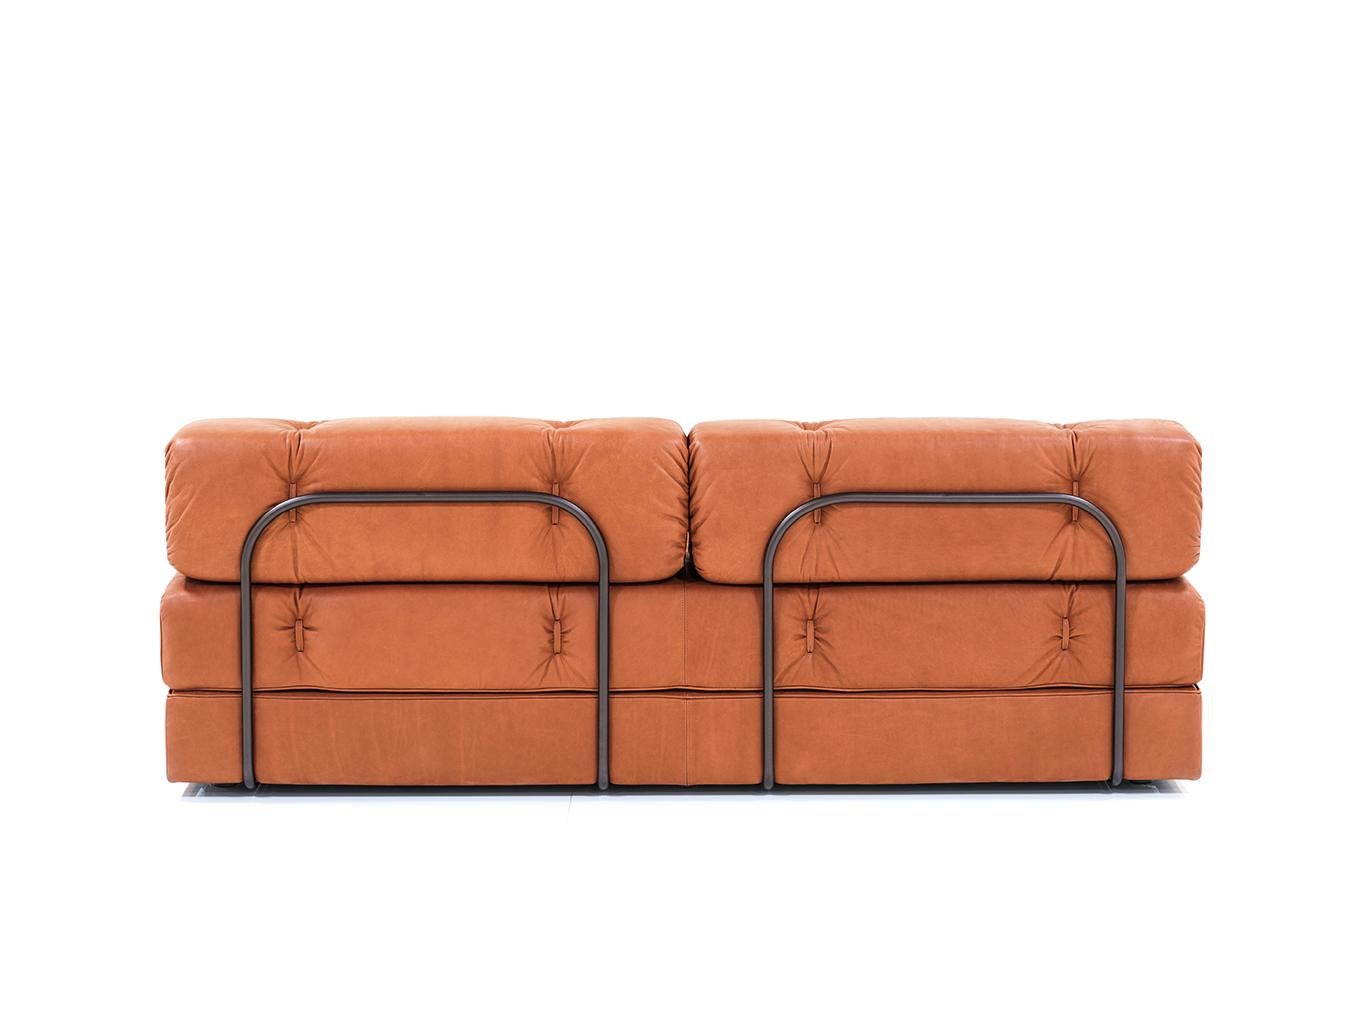 Available in FABRIC OR LEATHER.
VIDEO IS FROM A DIFFERENT MODEL
INCLUDES: 27920 
 27912  
27991 
27990

In fact, ATRIUM combines several of Wittmann's specialities: an innate ability to bring the greatest possible degree of comfort to any form, its